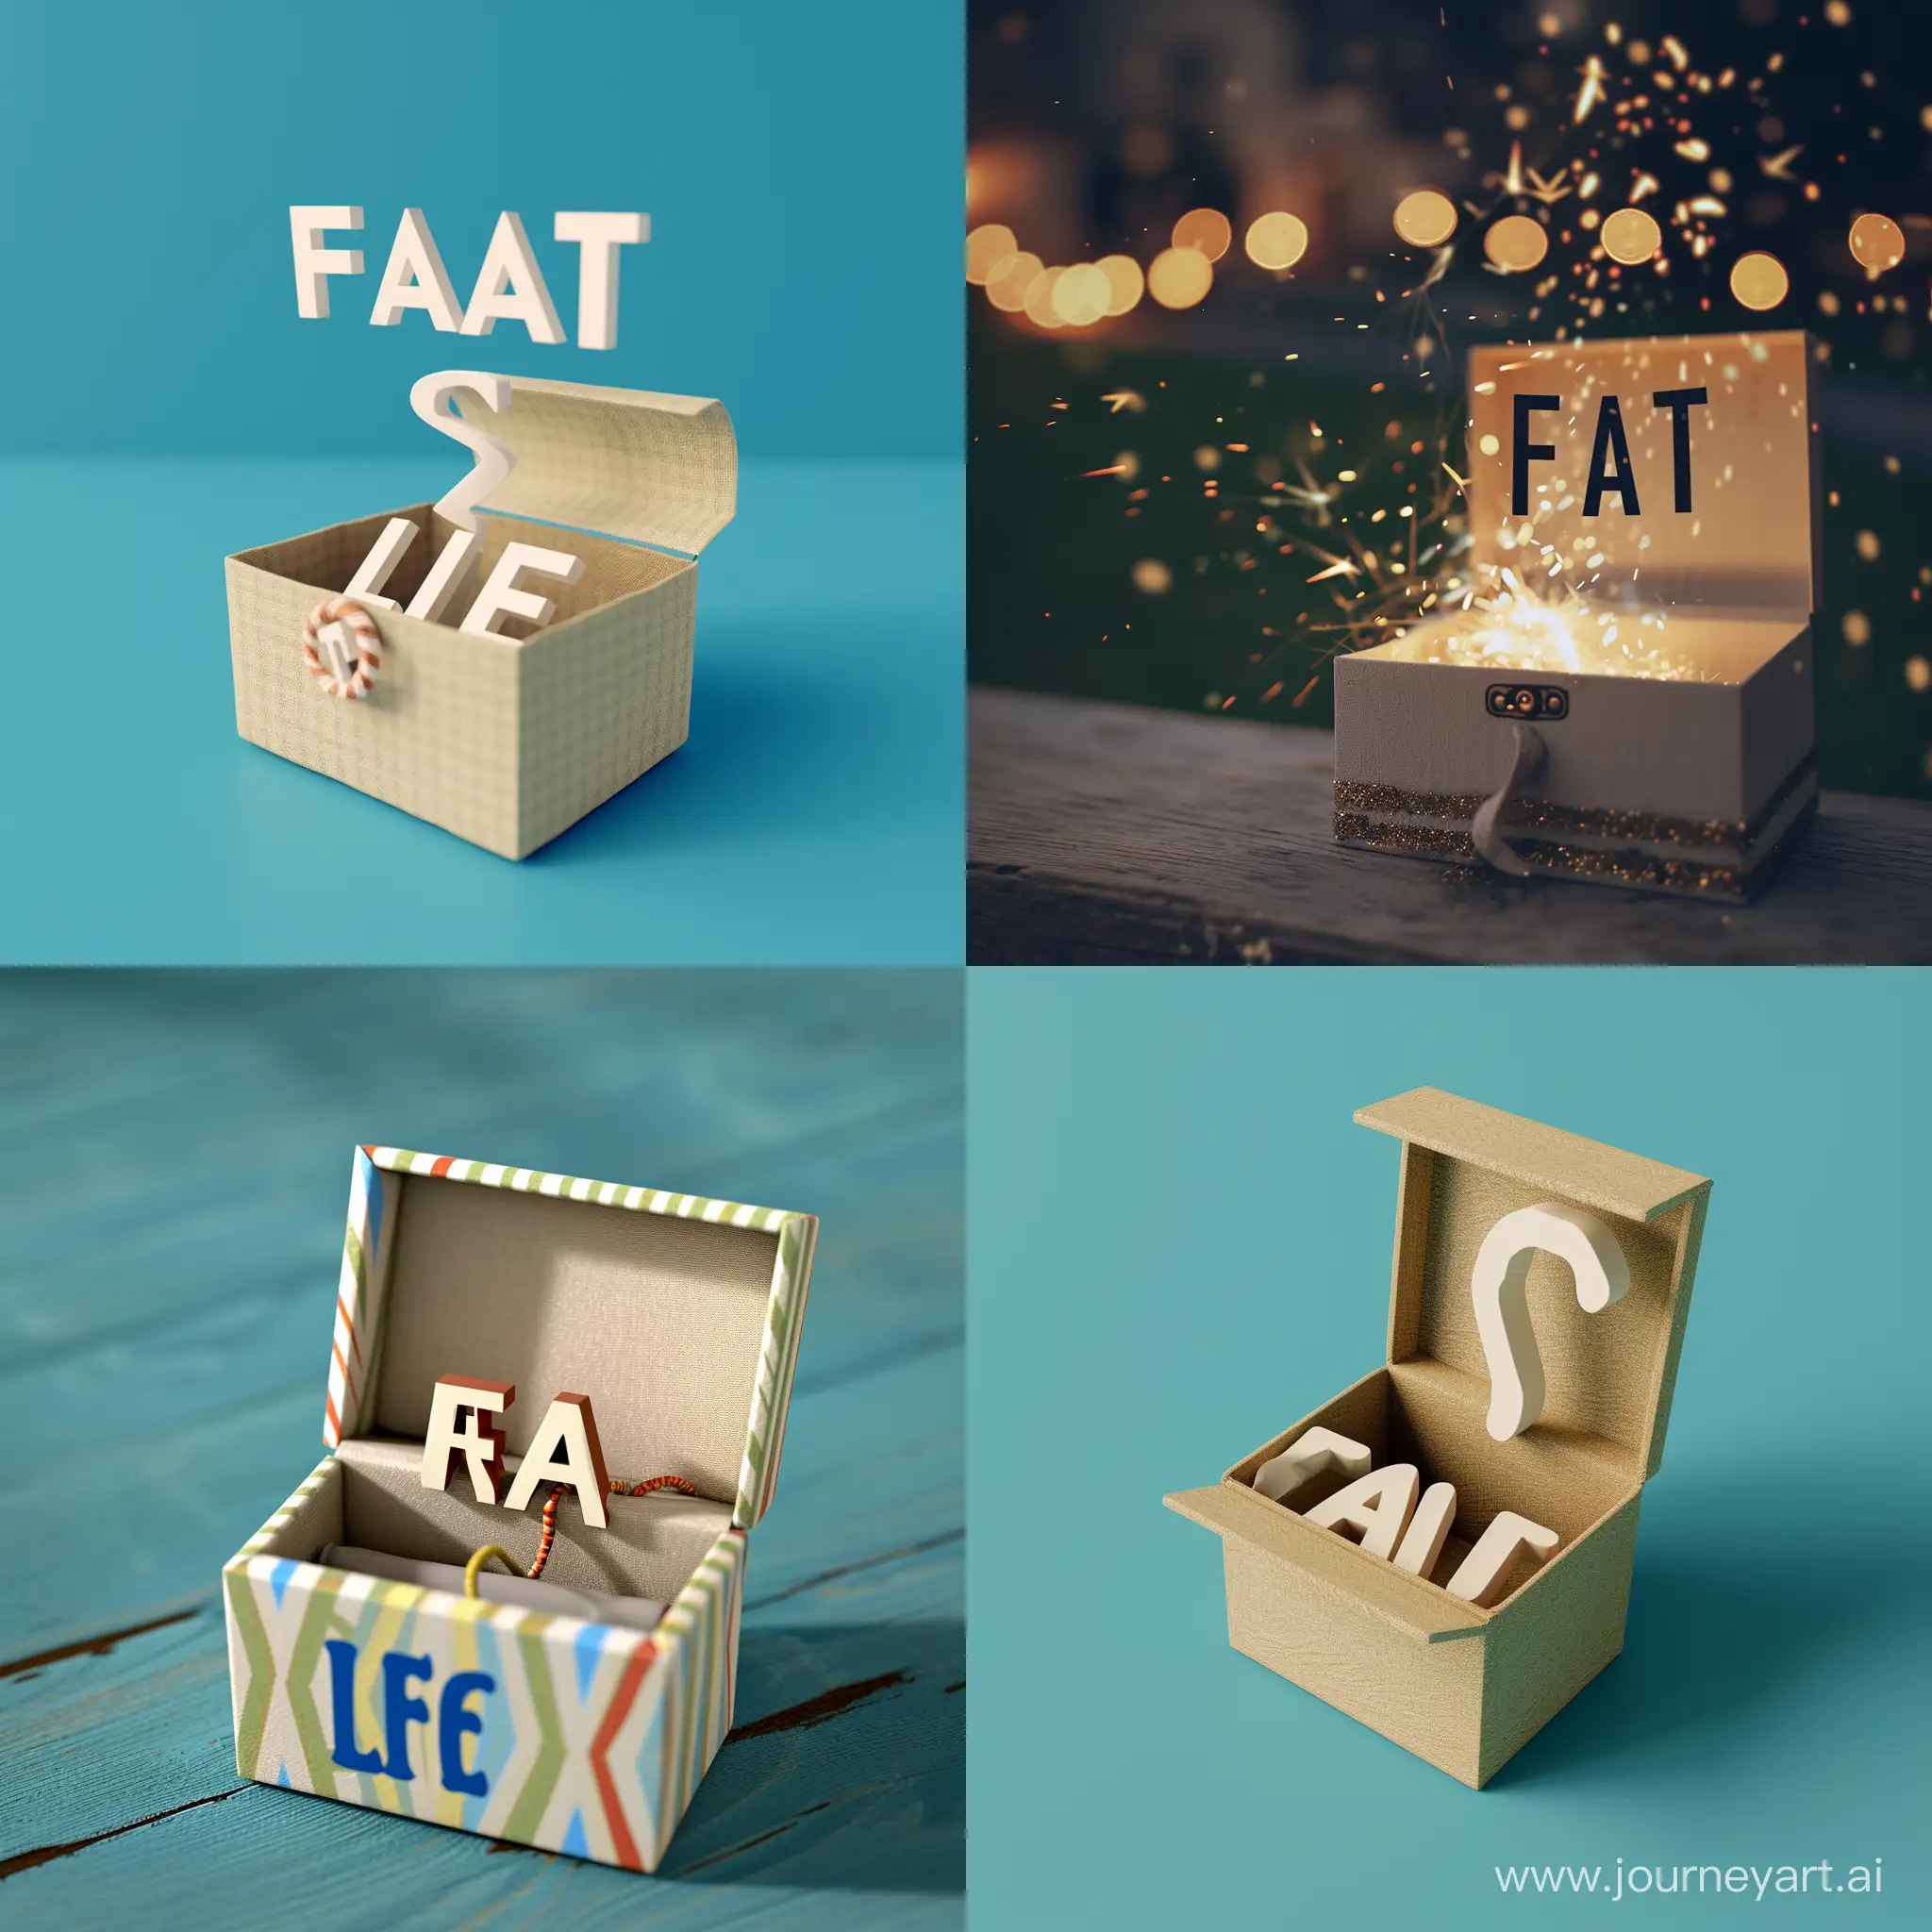 an open box with the word "fact" getting out from it imagine if the word life have a life